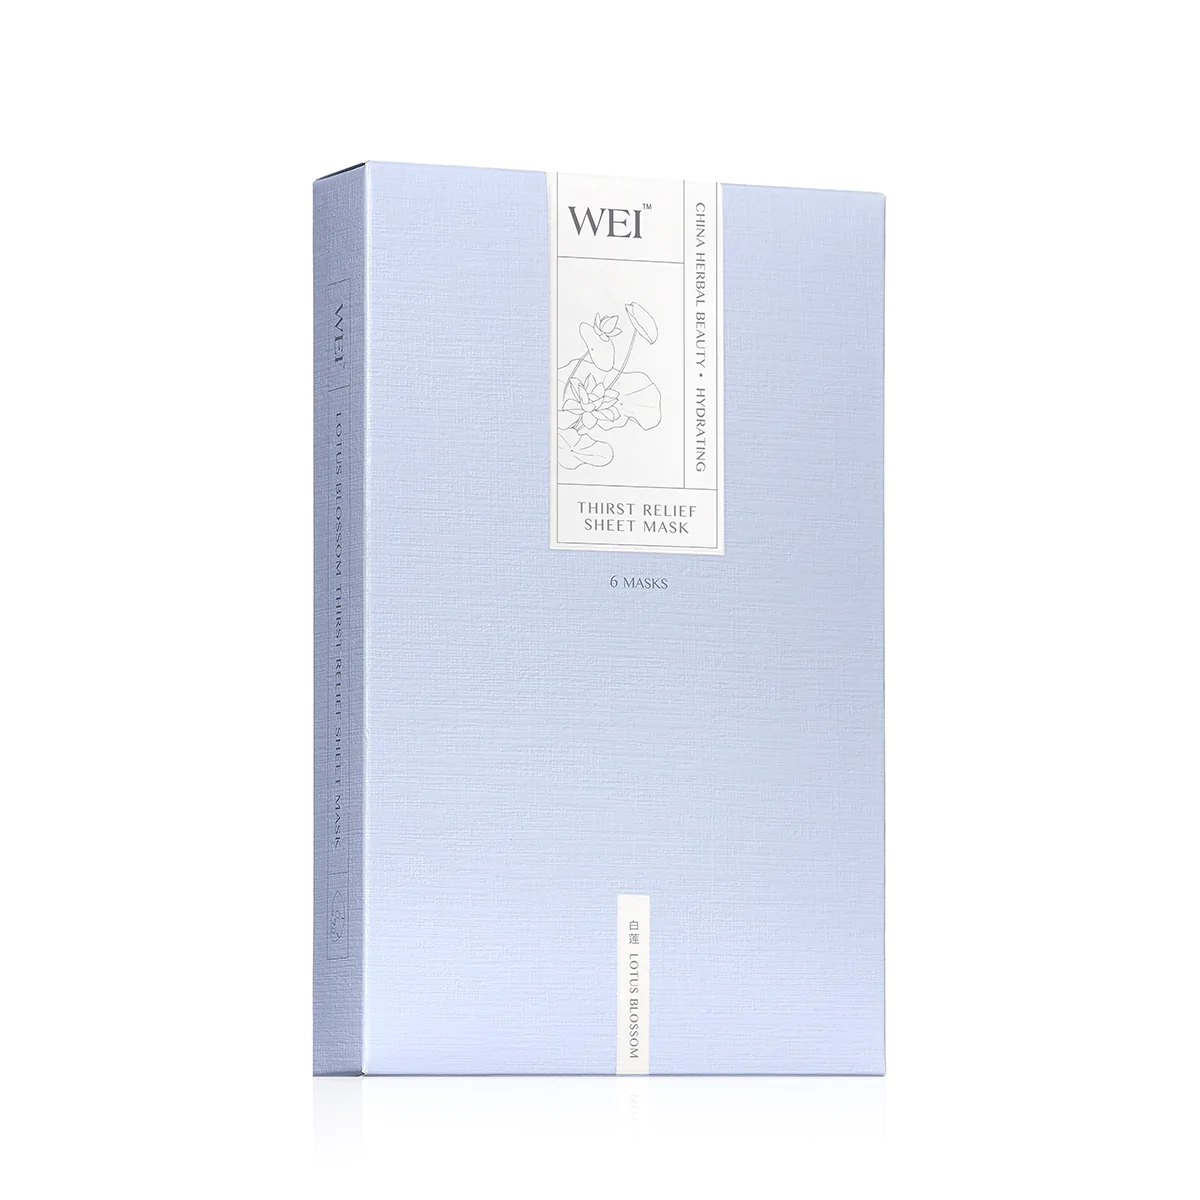 WEI Beauty Lotus Blossom Thirst Relief Sheet Mask (6 masks)